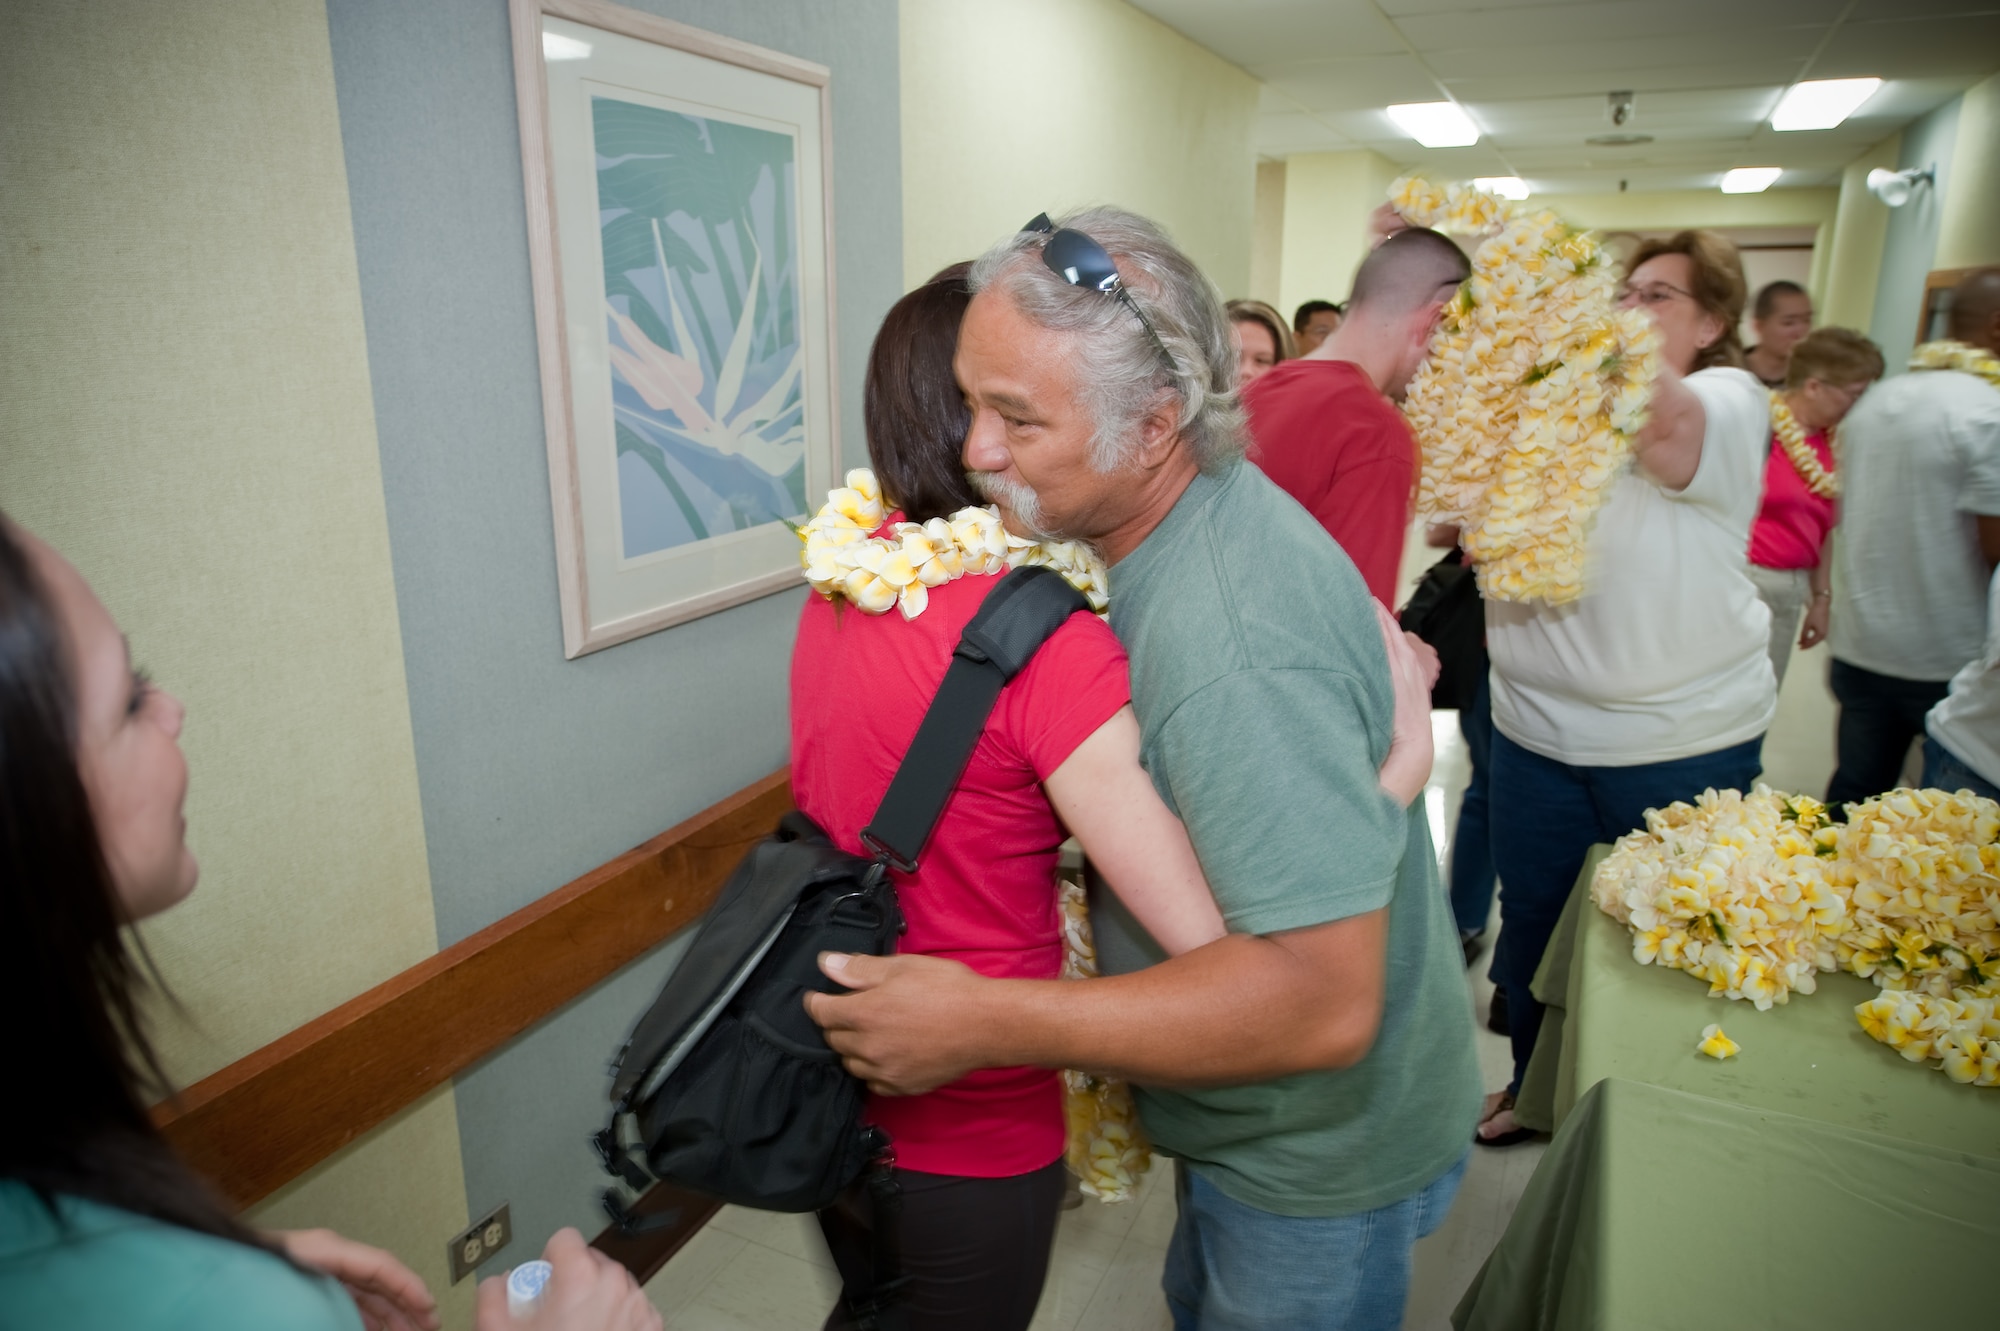 Colorado Air National Guard personnel of the 140th Medical Group, Buckley Air Force Base are greeted with a lei and a hug by Rodney and Denise, staff of the Kahuku Medical Center, Kahuku, Hawaii, March 14, 2010.  More than 60 Guardsmen attended a familiarization briefing to learn about the various aspects of the Hawaiian culture before beginning their work as part of E Malama Kakou (translated from Hawaiian as “to care for all”), an Innovative Readiness Training Program. (U.S. Air Force photo/Master Sgt. John Nimmo, Sr.) (RELEASED)